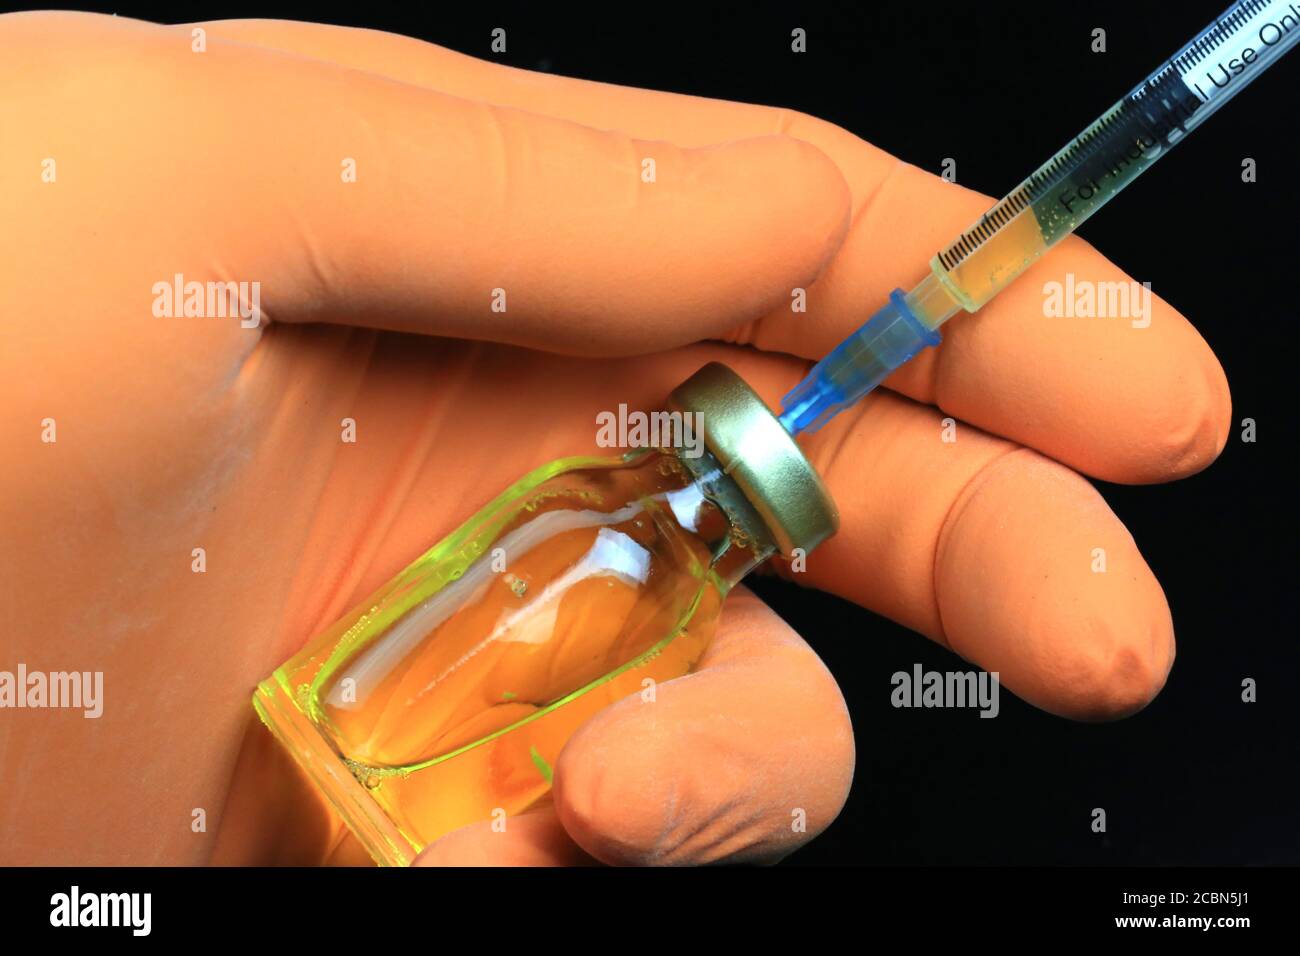 Insulin vial and hypodermic needle preparation Stock Photo